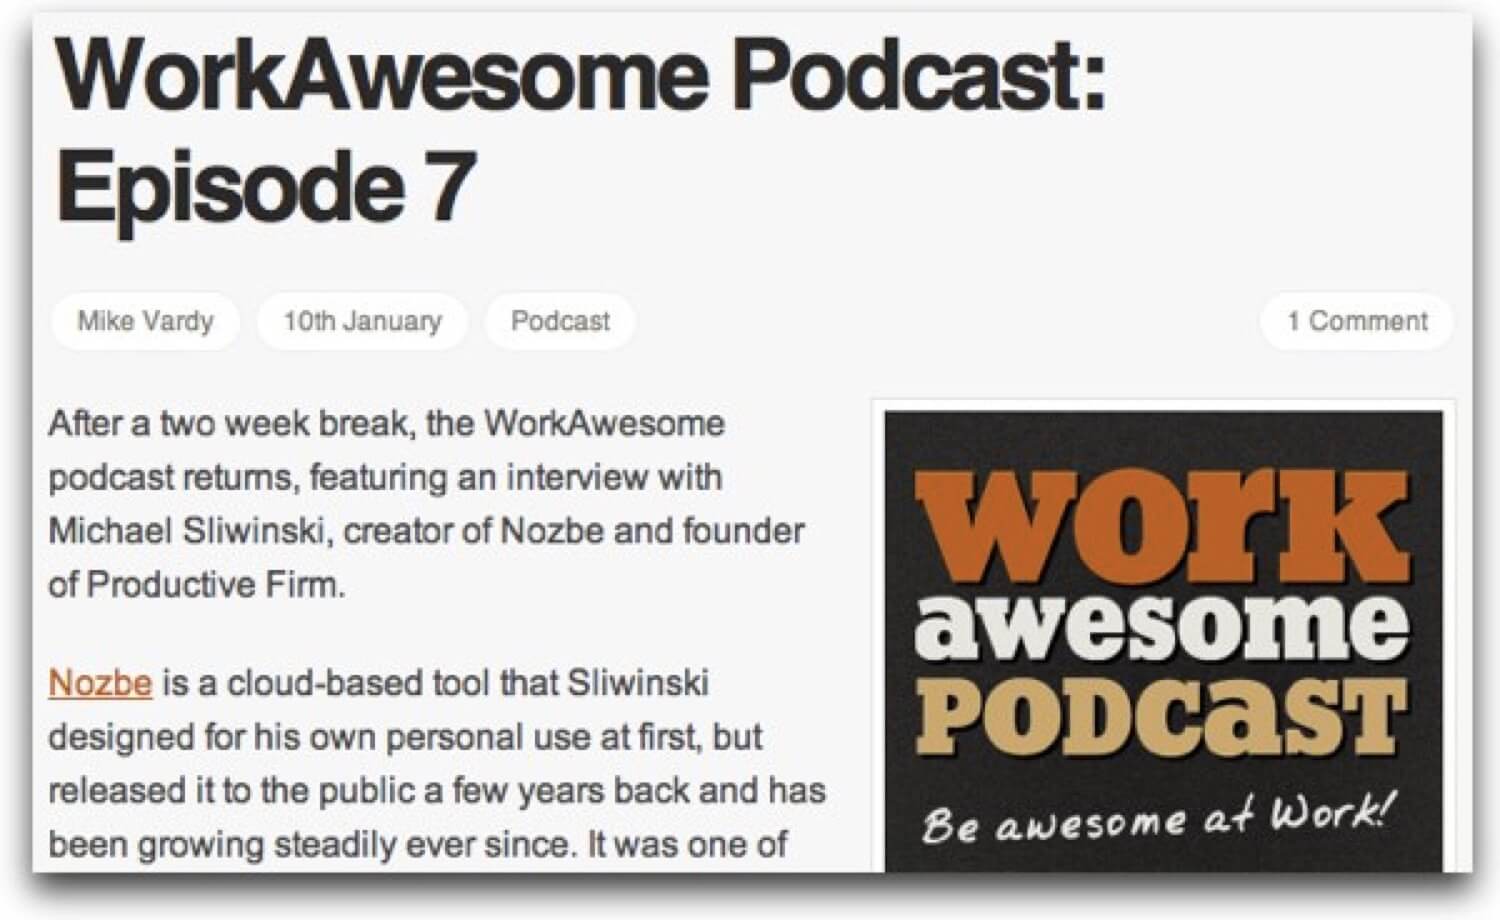 Yours truly - Michael of Nozbe on WorkAwesome podcast